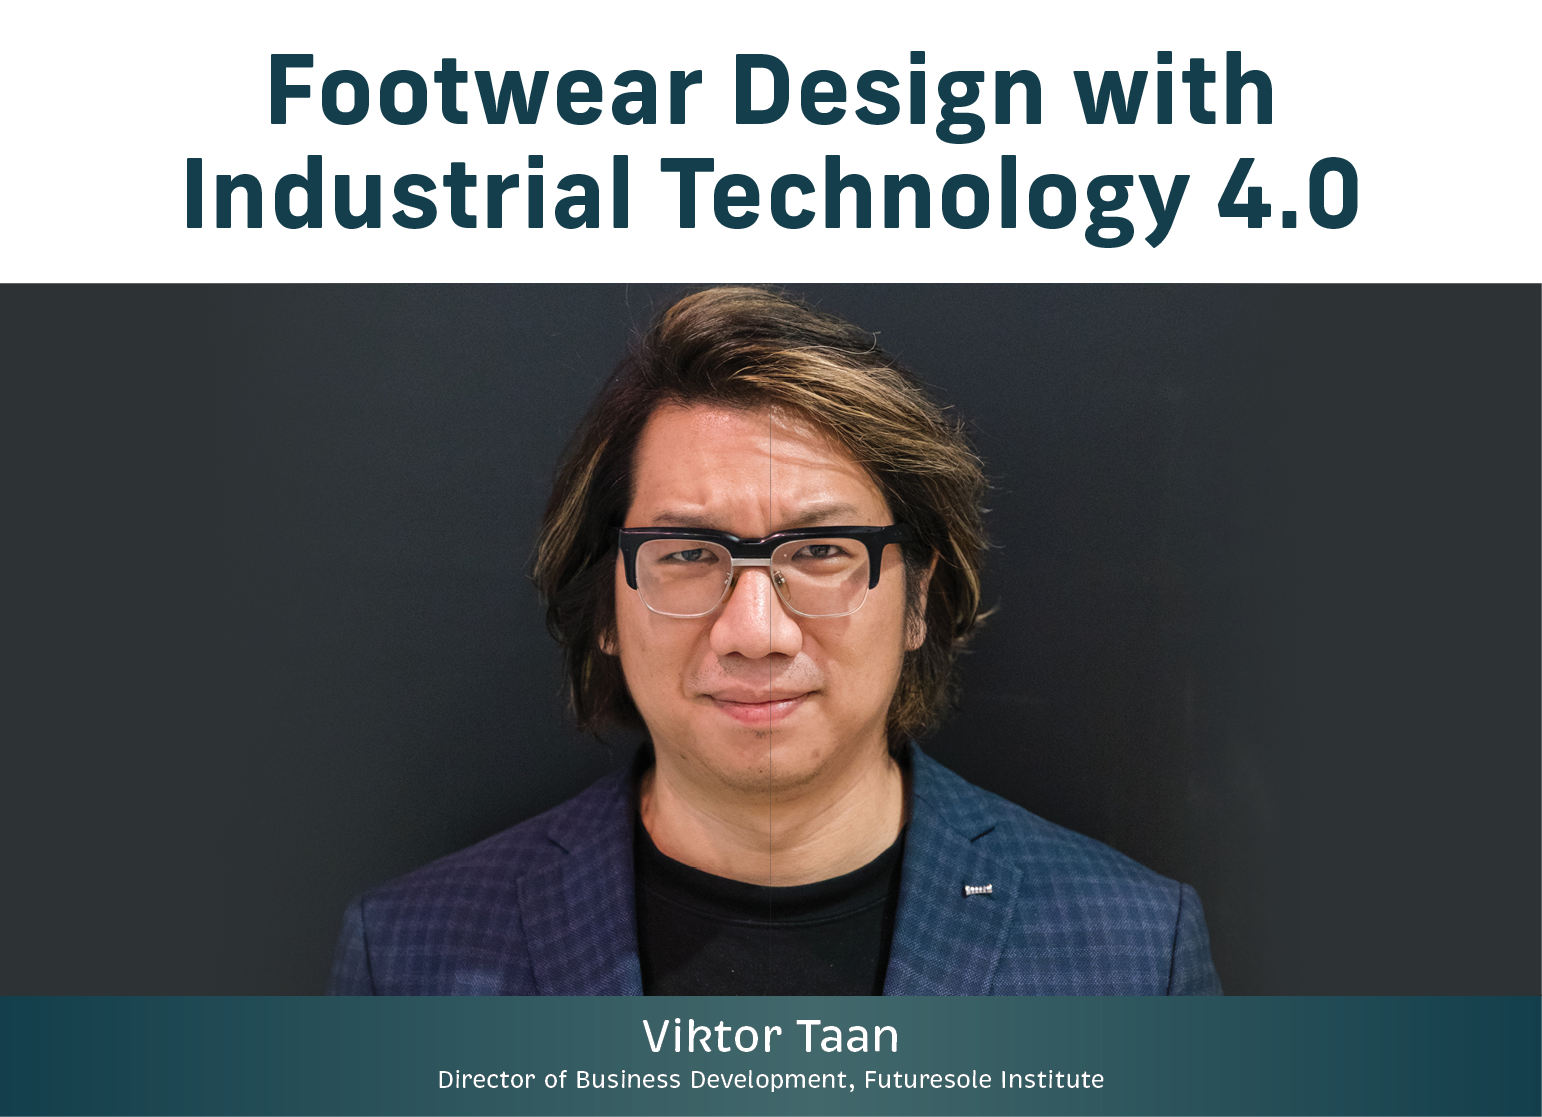 Footwear design with industrial technology 4.0